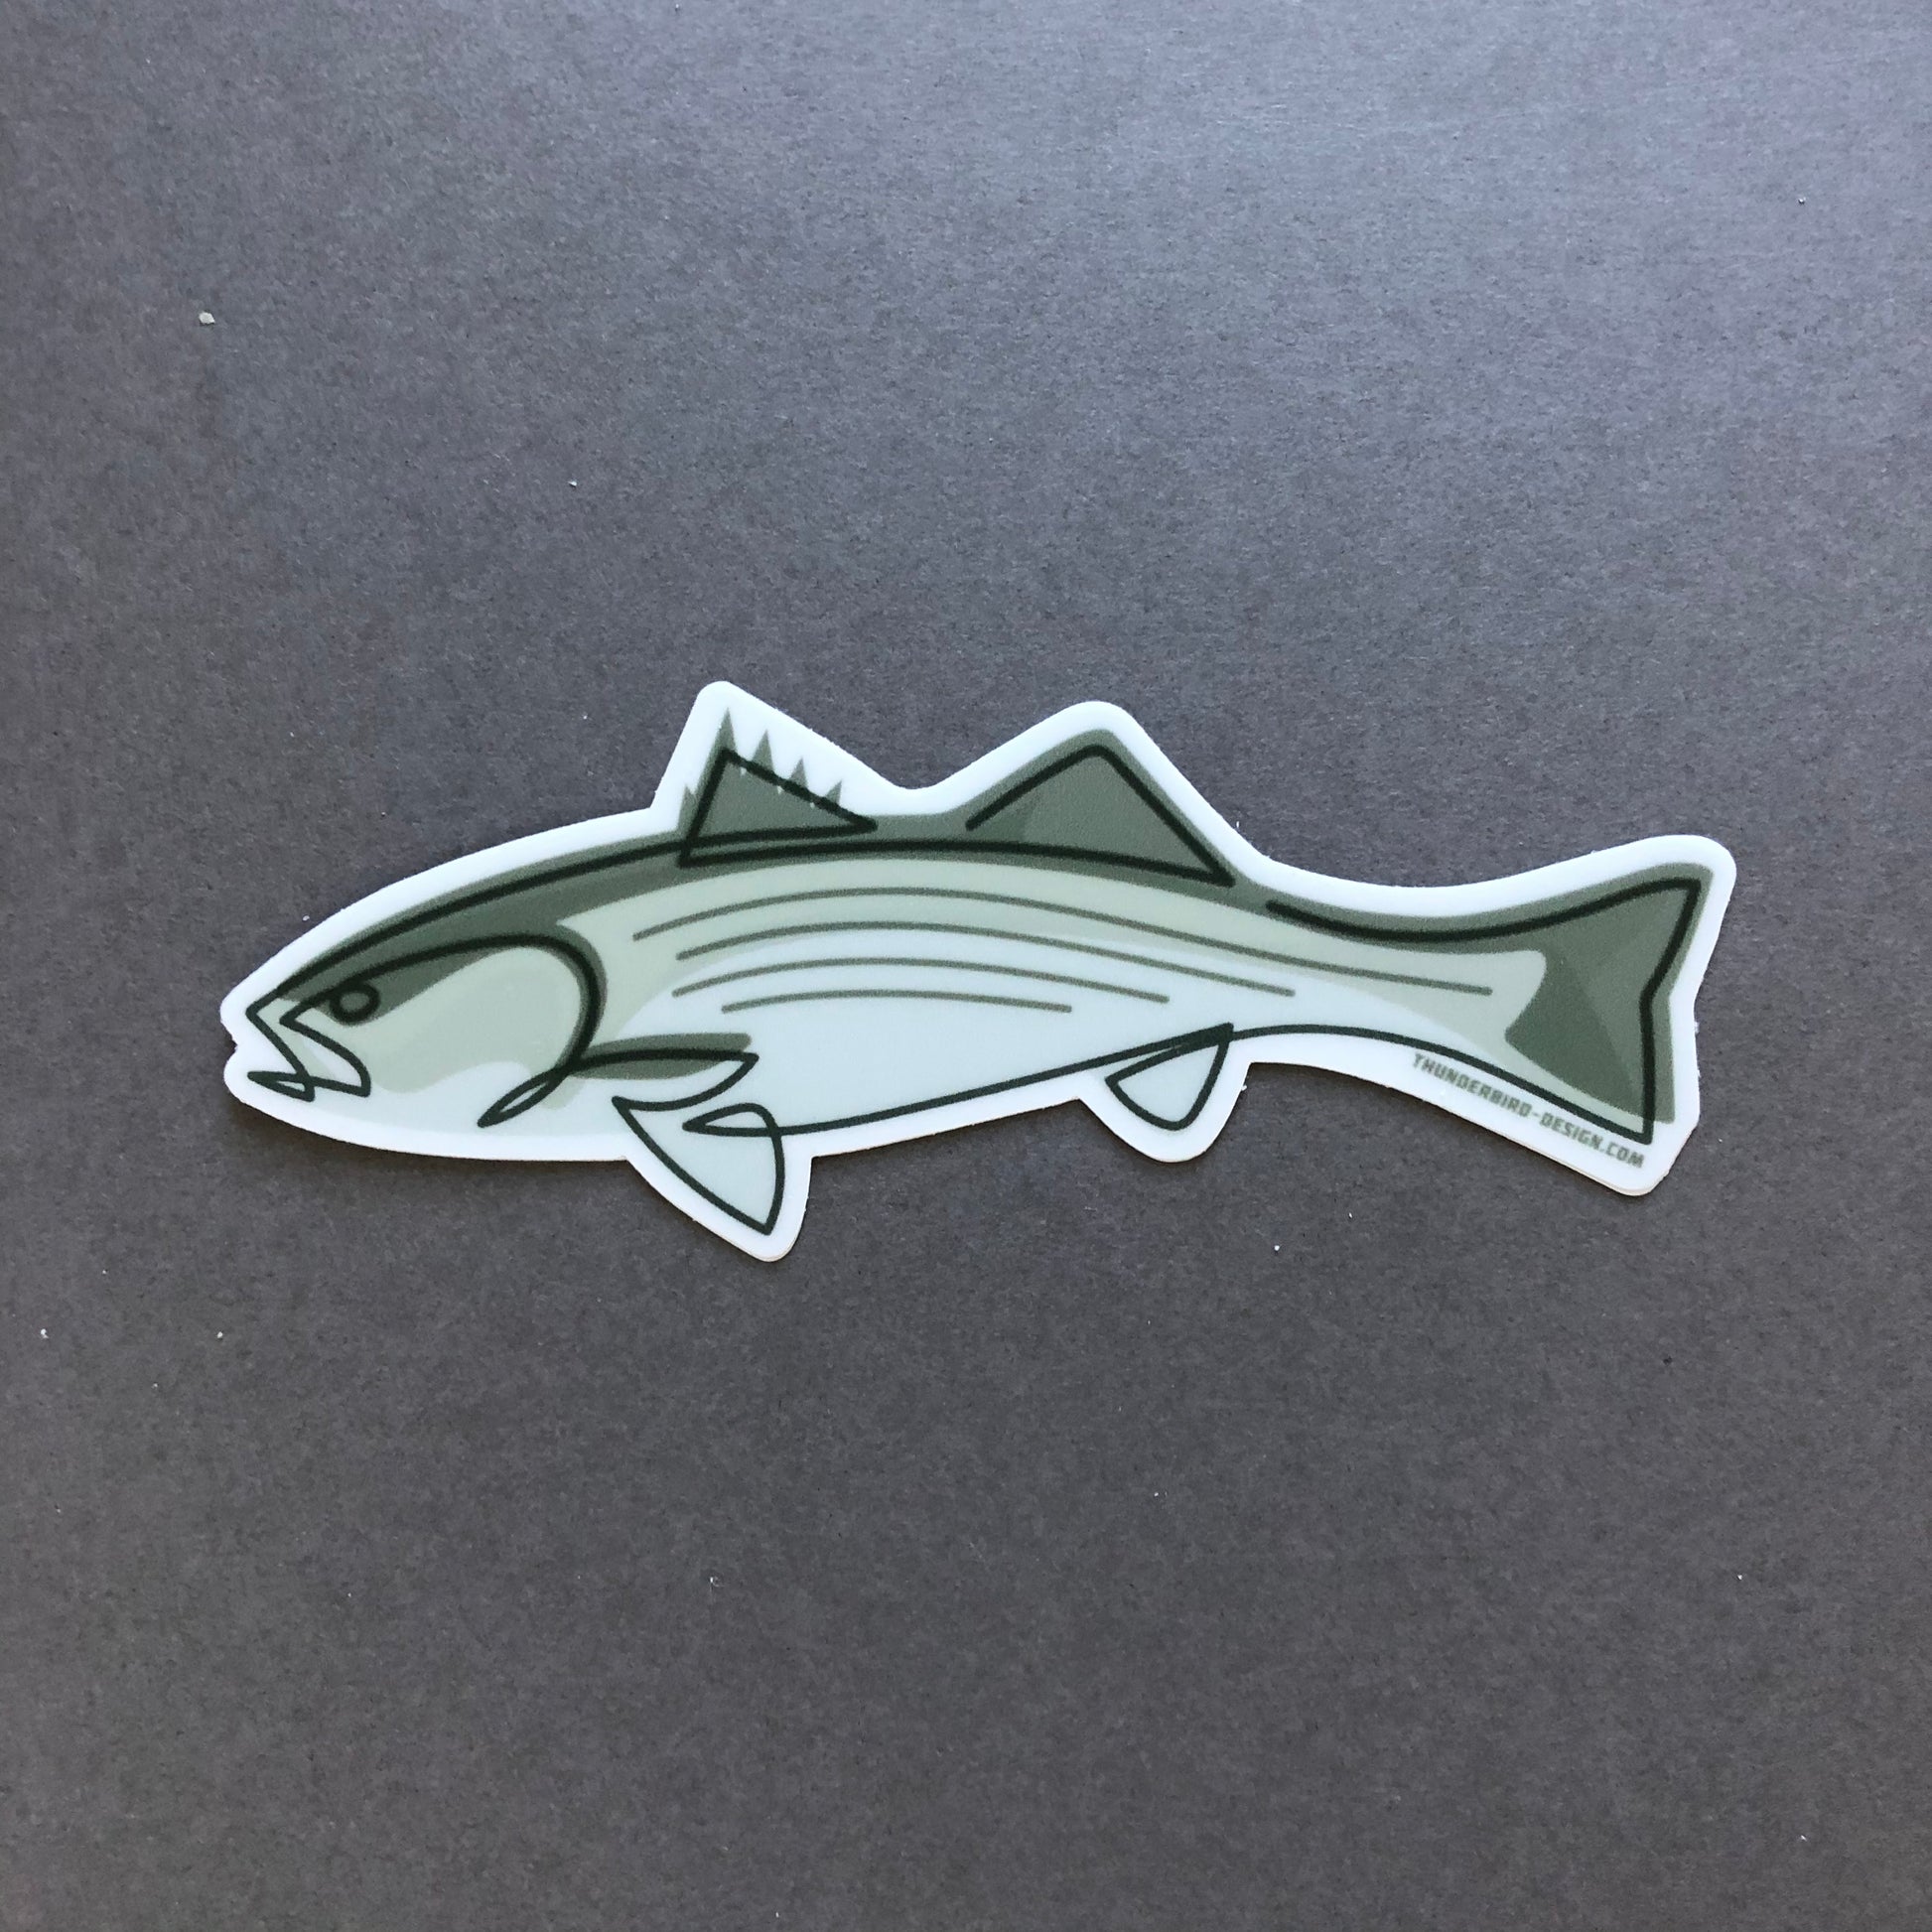 Thunderbird Outdoor SupplyStriped Bass - Single Line Decal w/ Matte FinishStriped Bass - Single Line Decal
4" Drawn, Single Line Contour Illustration of a Striped Bass.These weatherproof Matte decals are perfect for your Rod tube, water bottle, tackle box, car window or 